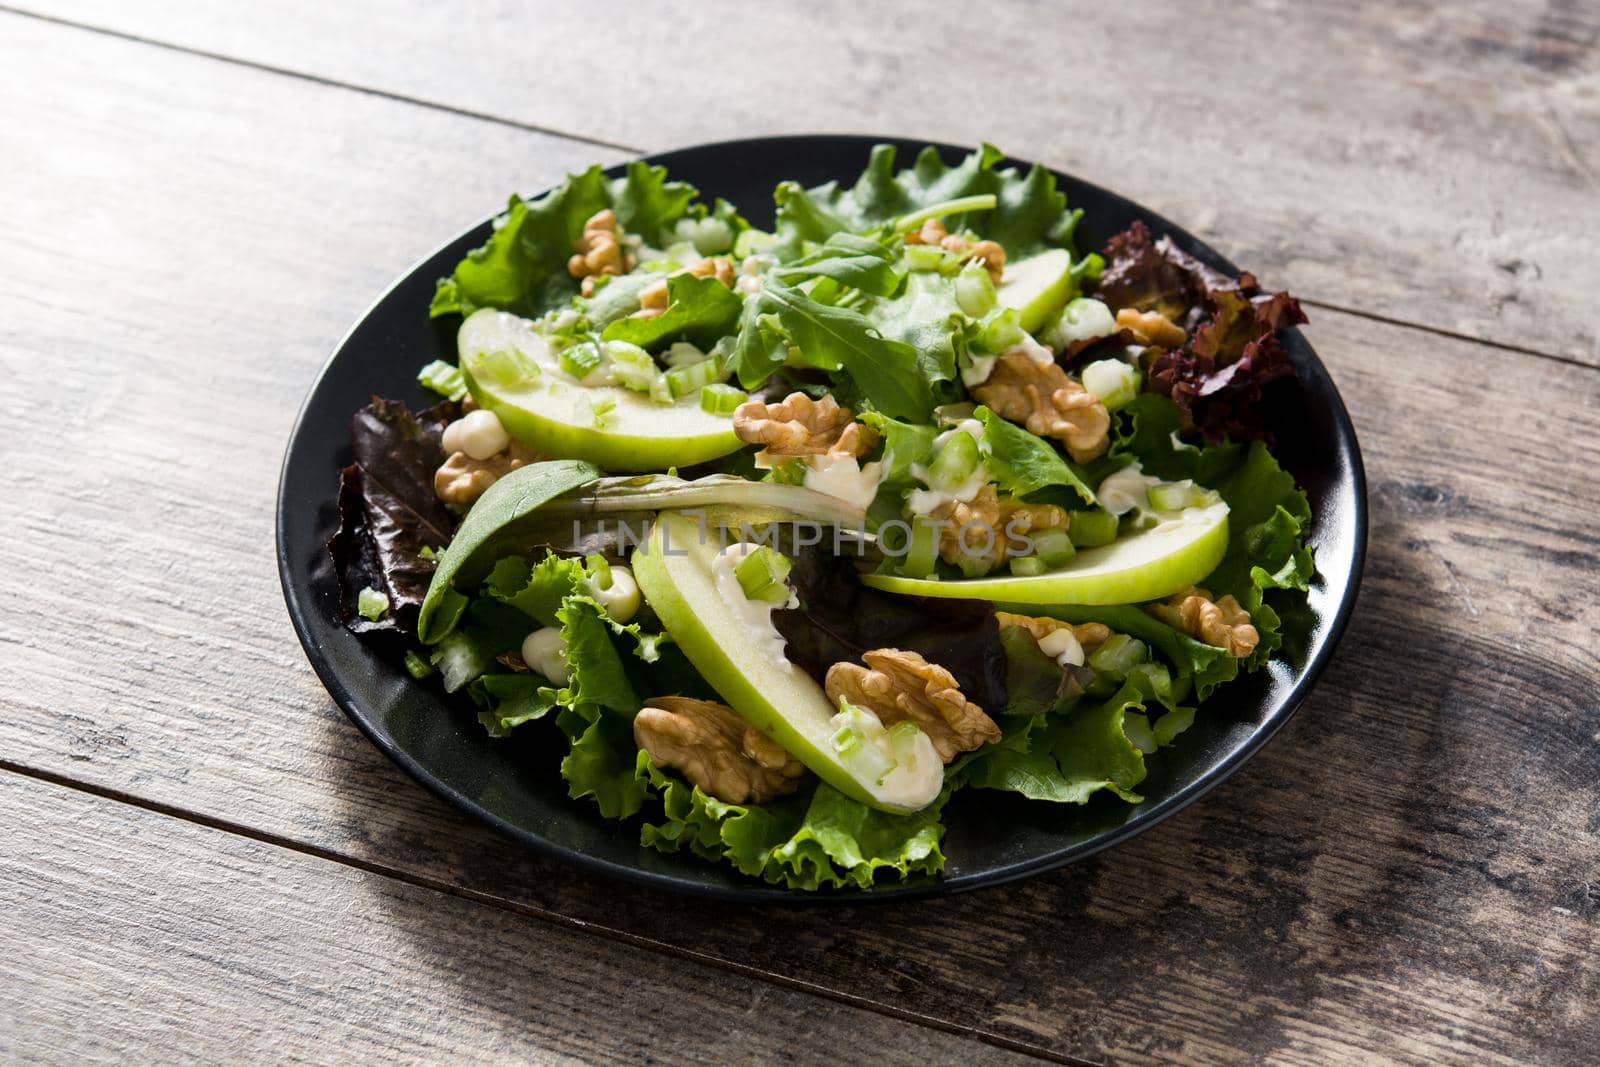 Fresh Waldorf salad with lettuce, green apples, walnuts and celery on wooden table